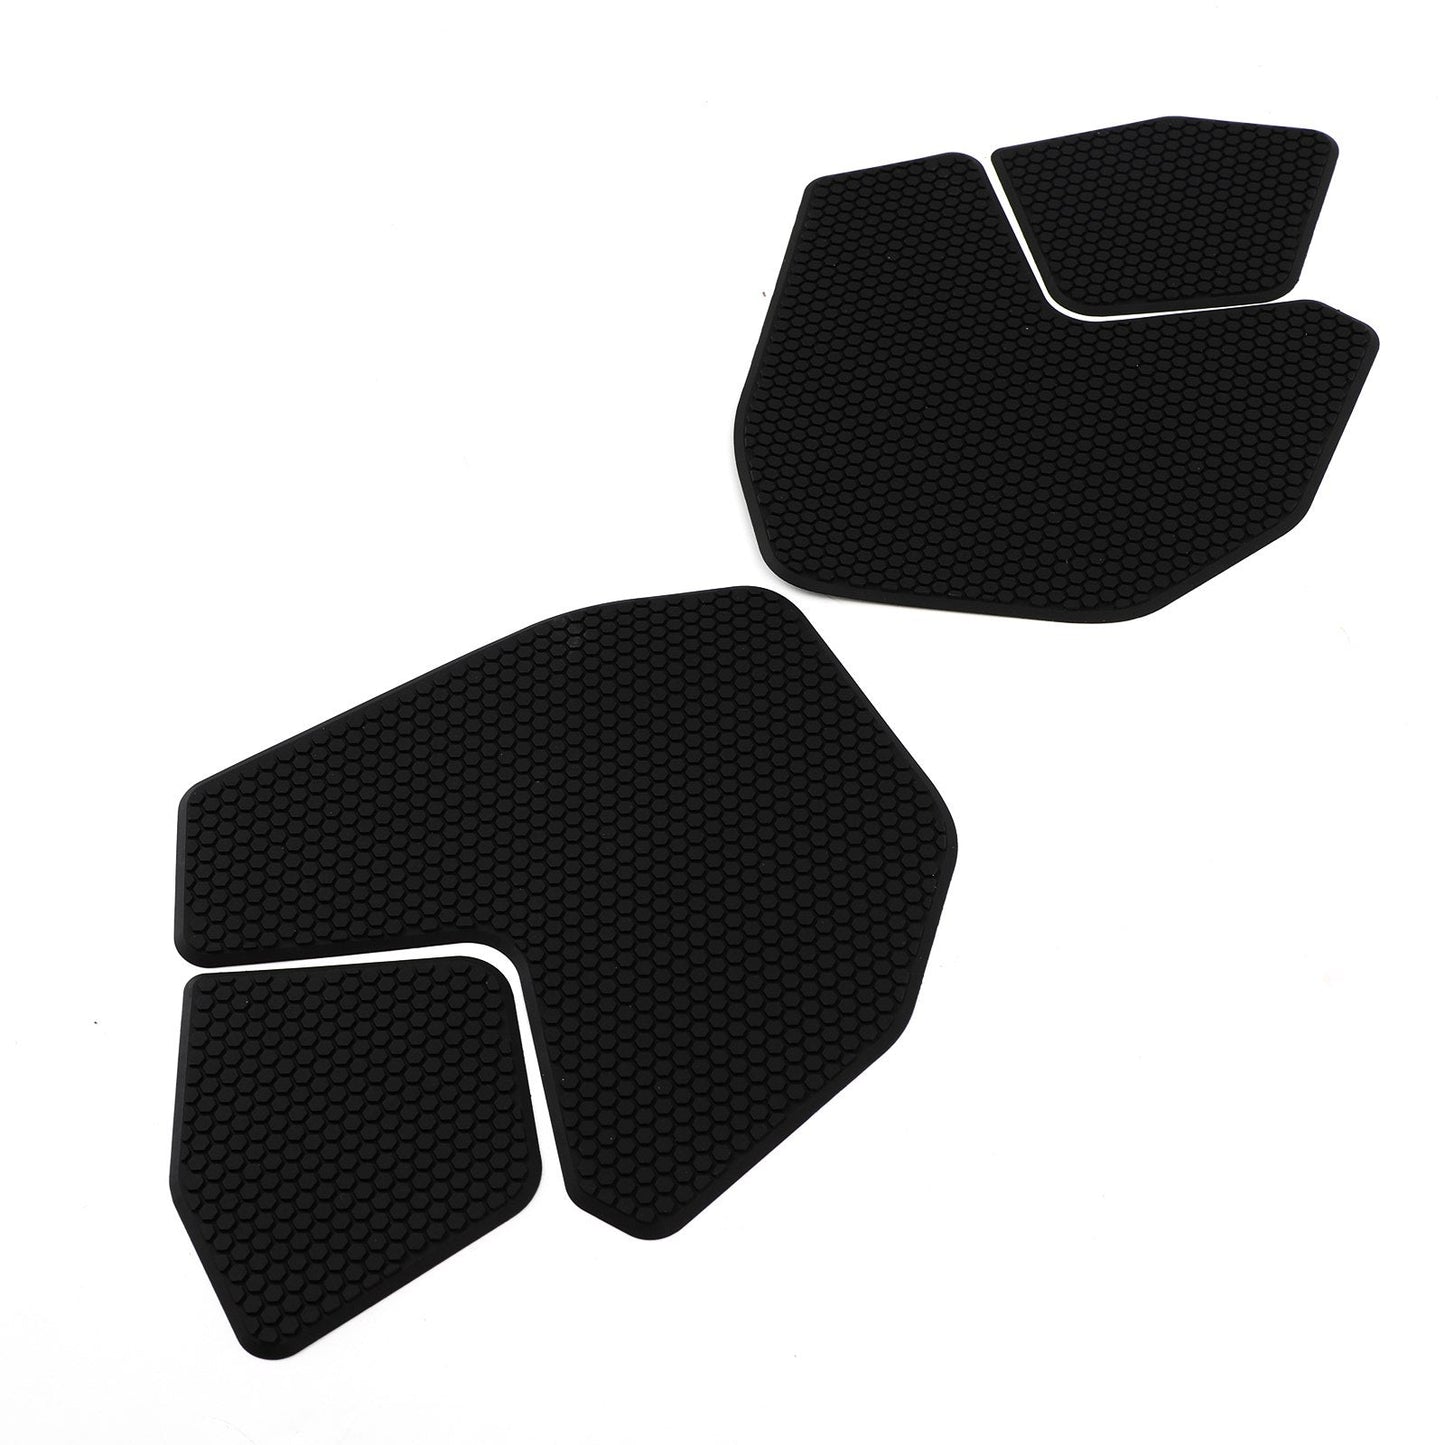 4x Side Tank Traction Grips Pads Fit for Yamaha MT-09 MT09 FZ09 2013-2019